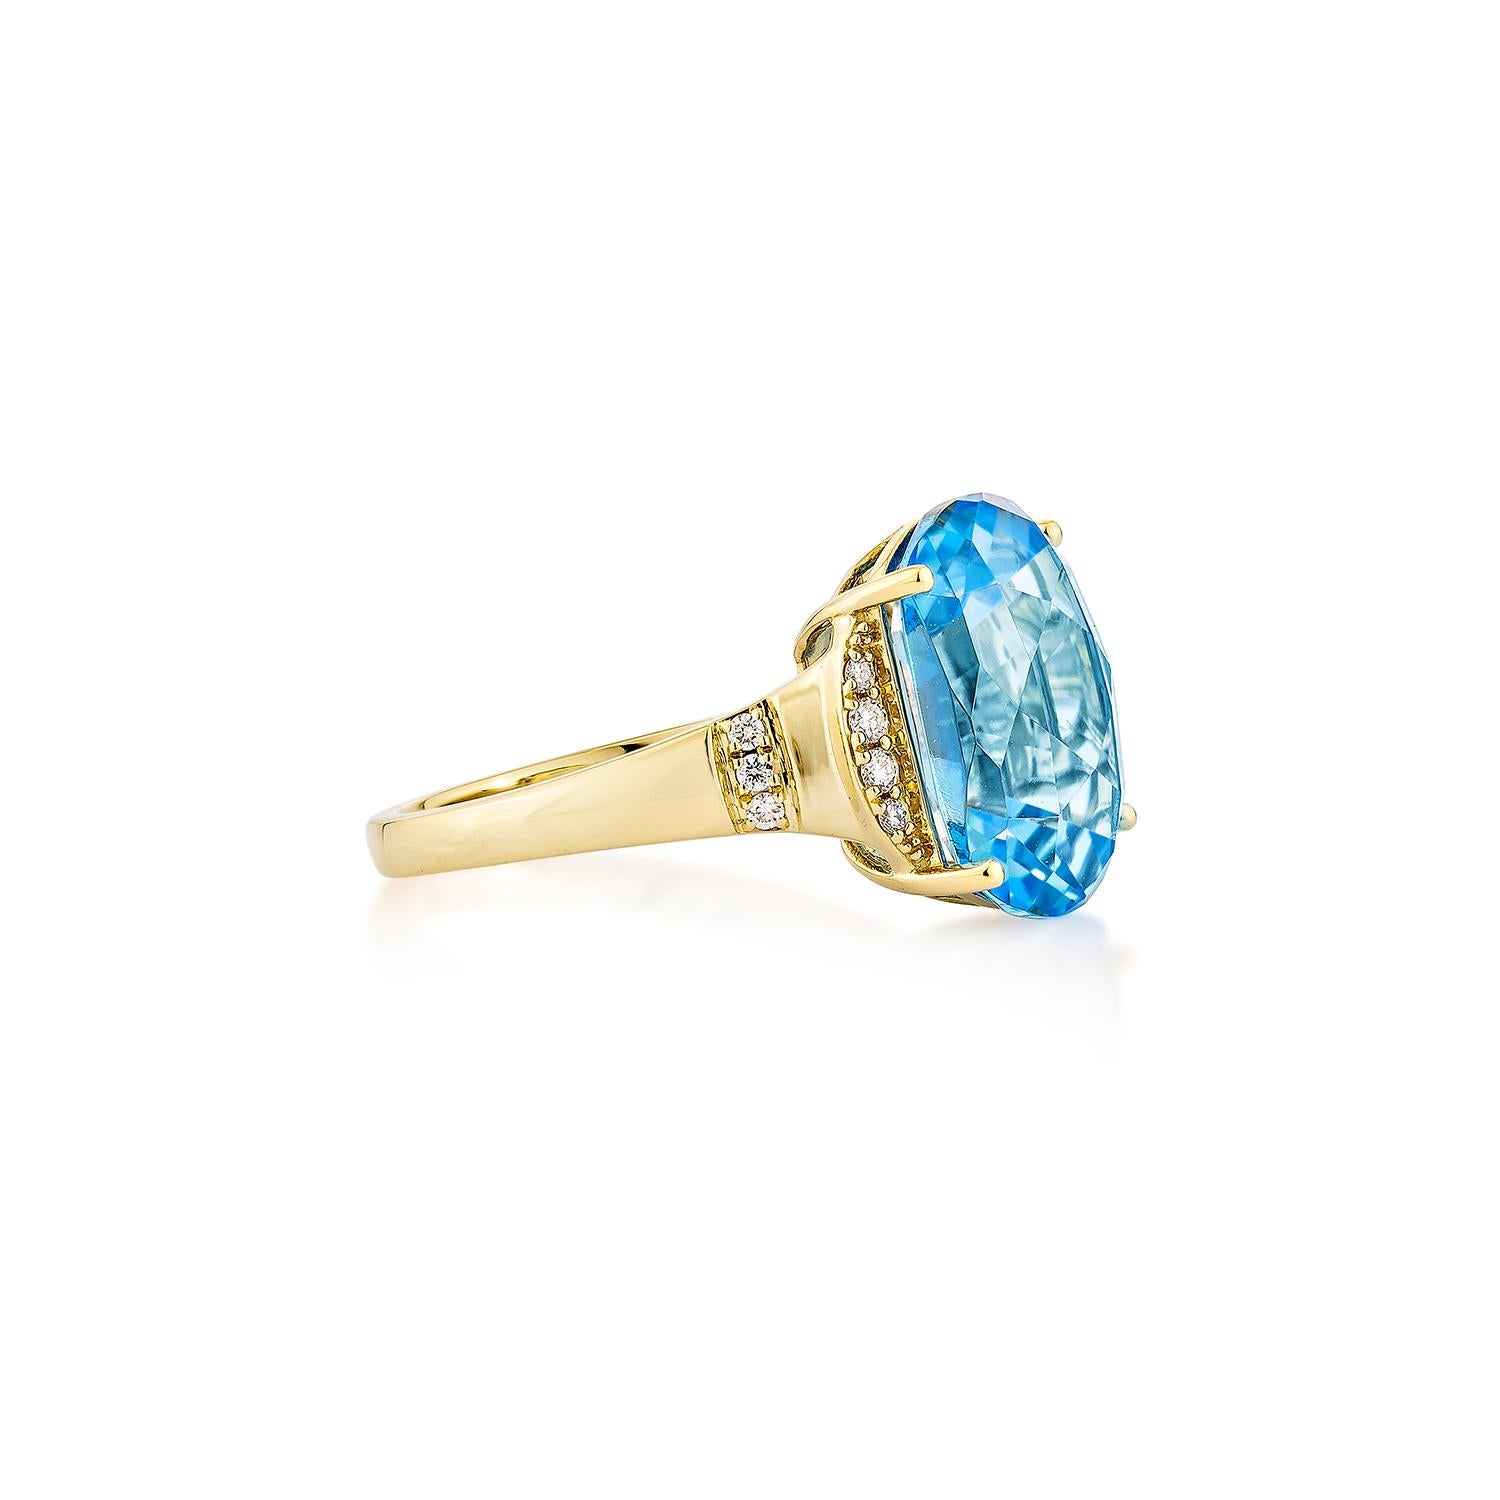 Introducing a new ring style that embodies luxury, fashion, and personal flair. These rings symbolize success, love, and importance. The collection has antique rings. They contain exquisite gems like Swiss blue topaz, mint quartz, and citrine. A